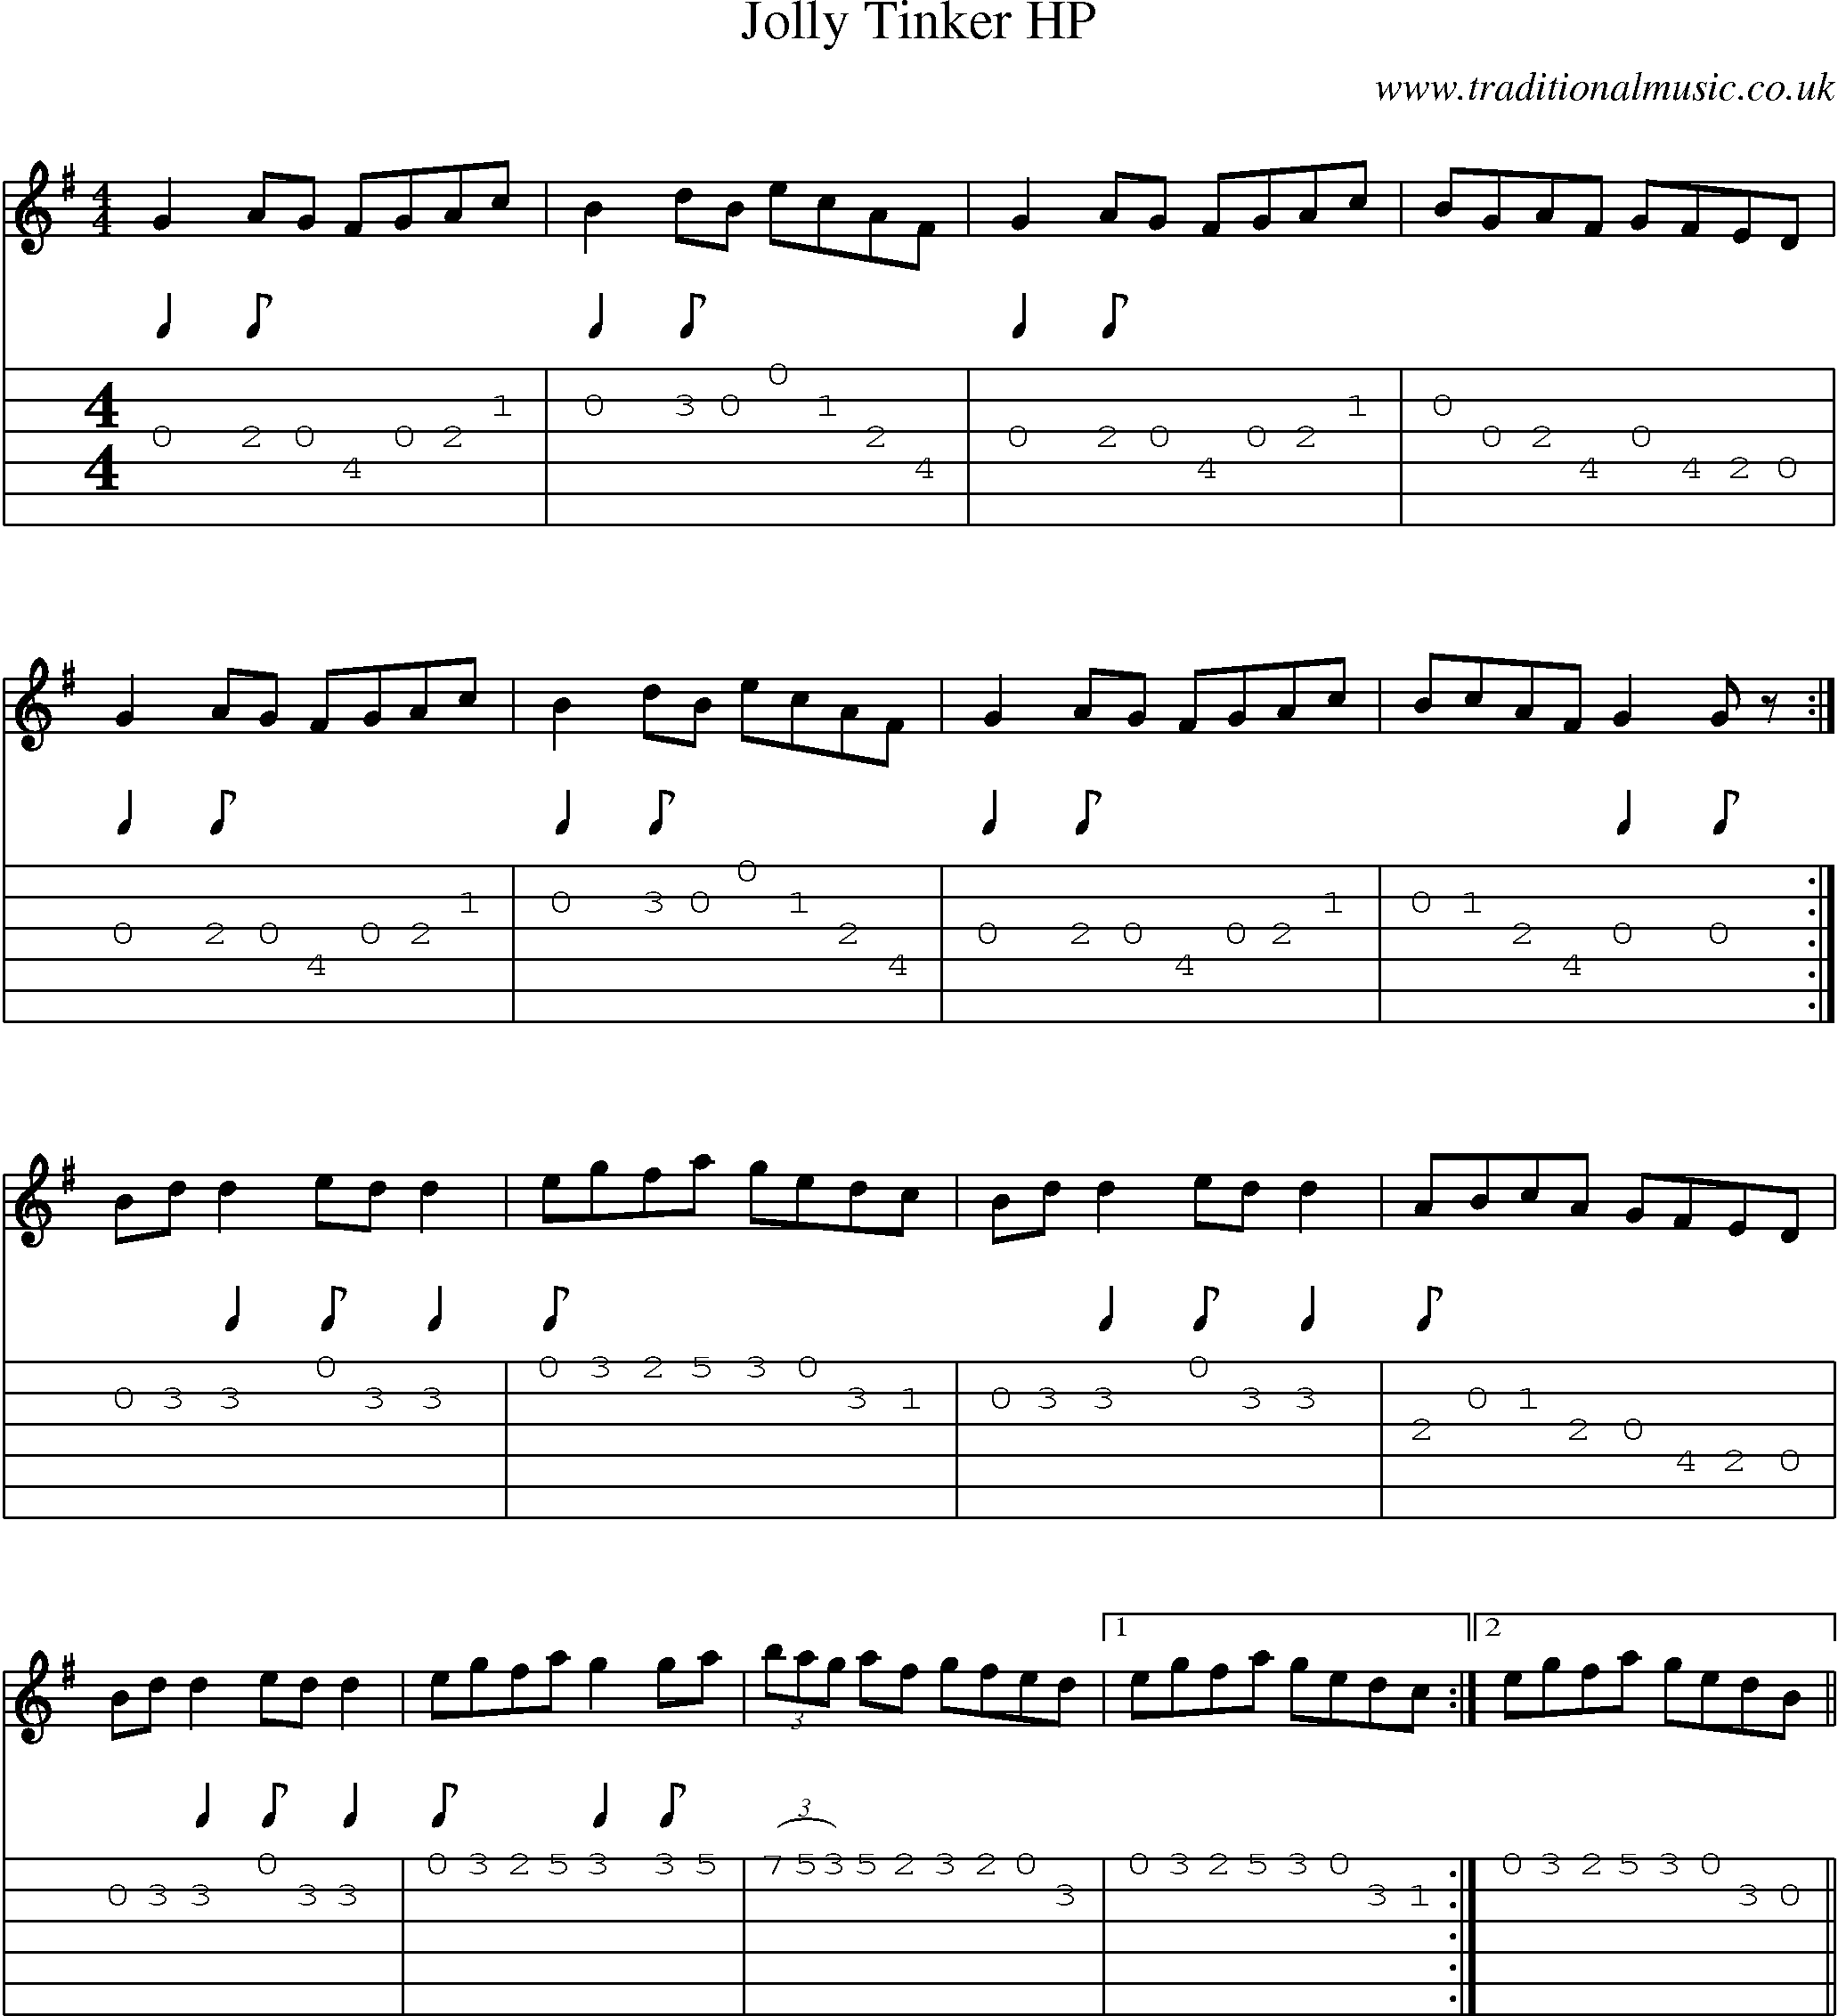 Music Score and Guitar Tabs for Jolly Tinker 